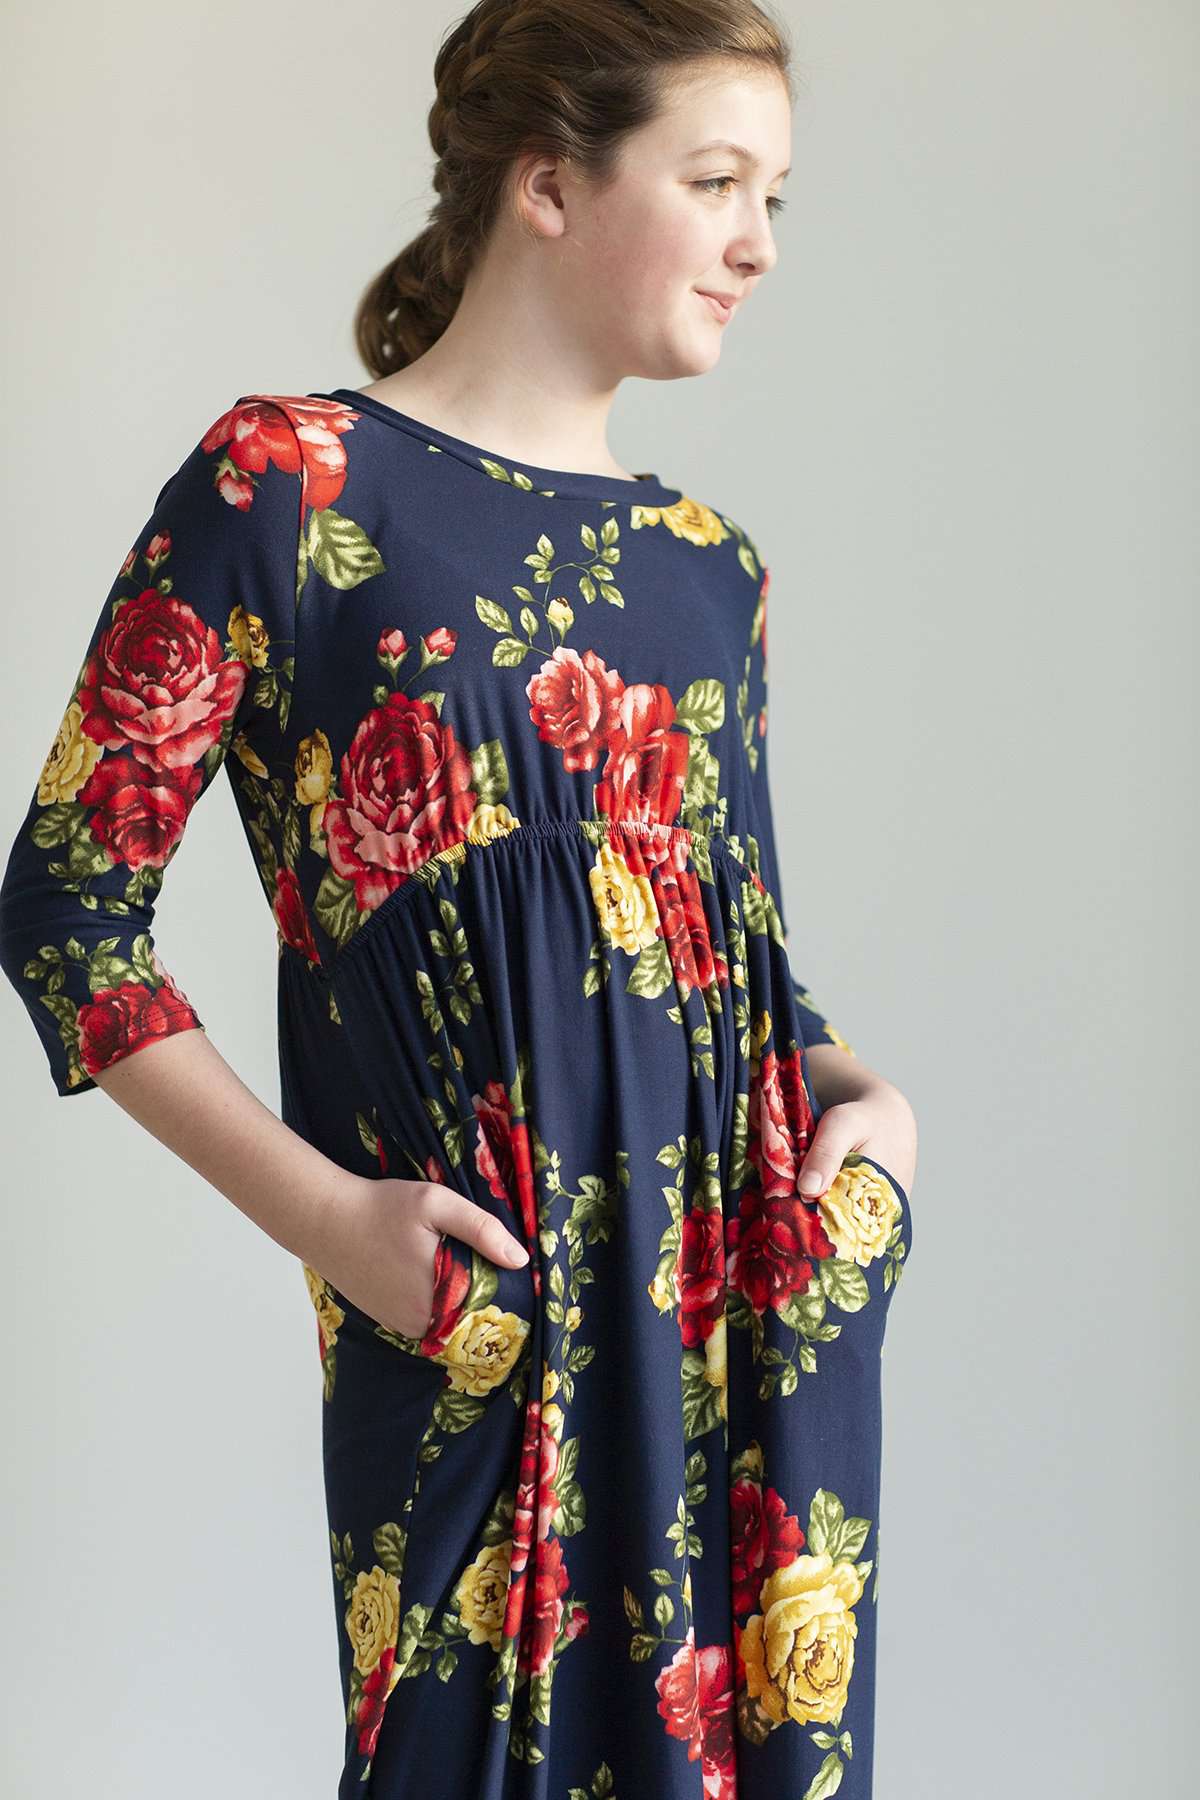 Young girl wearing a navy floral maxi dress